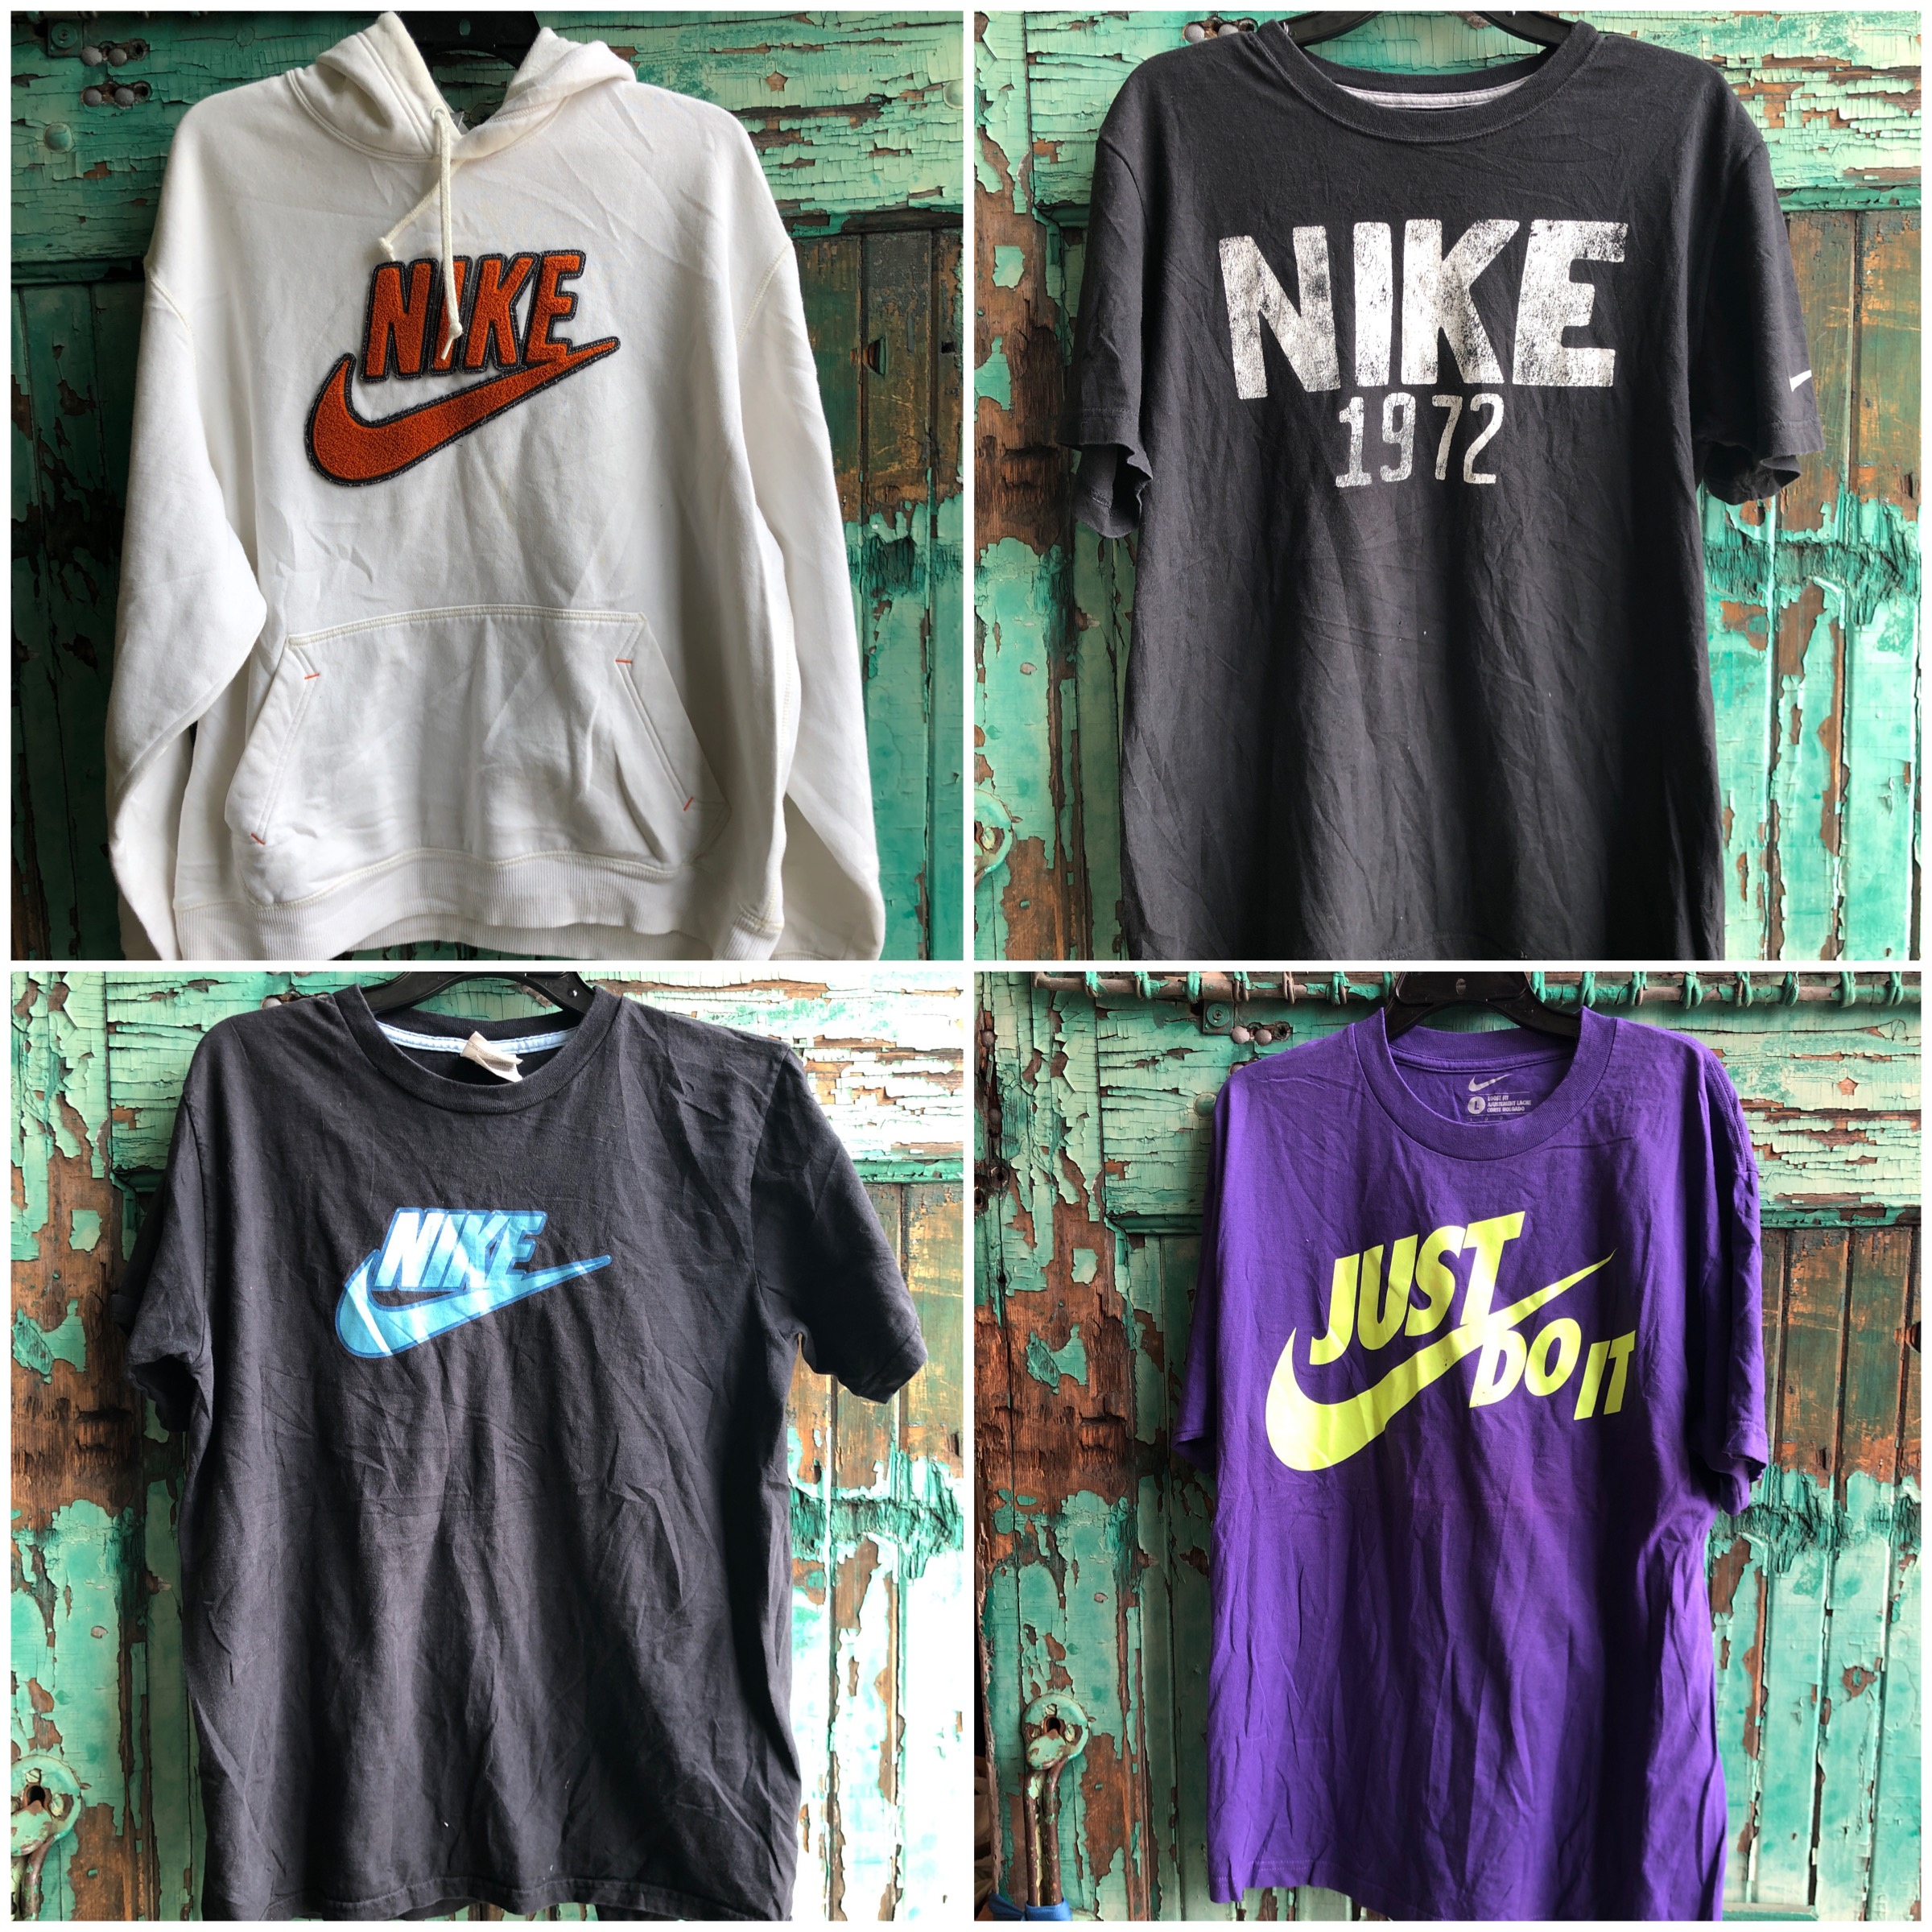 Nike branded By the Pound: Bulk Vintage Clothing